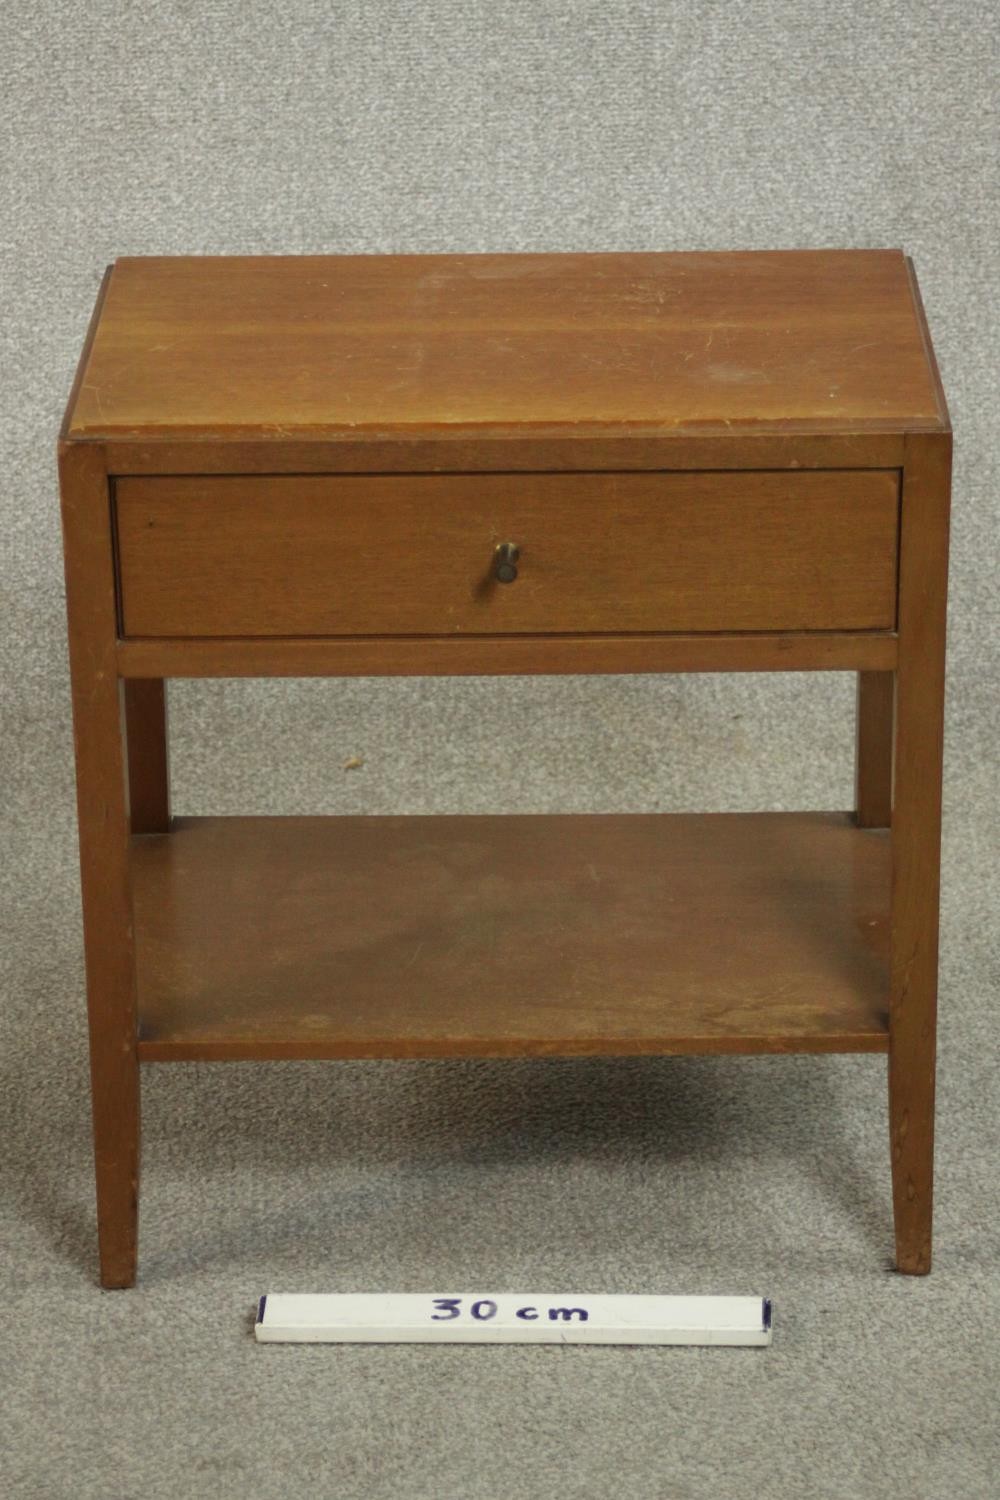 A mid 20th century Heal's style oak bedside table, with a single drawer over an undertier on - Image 2 of 4